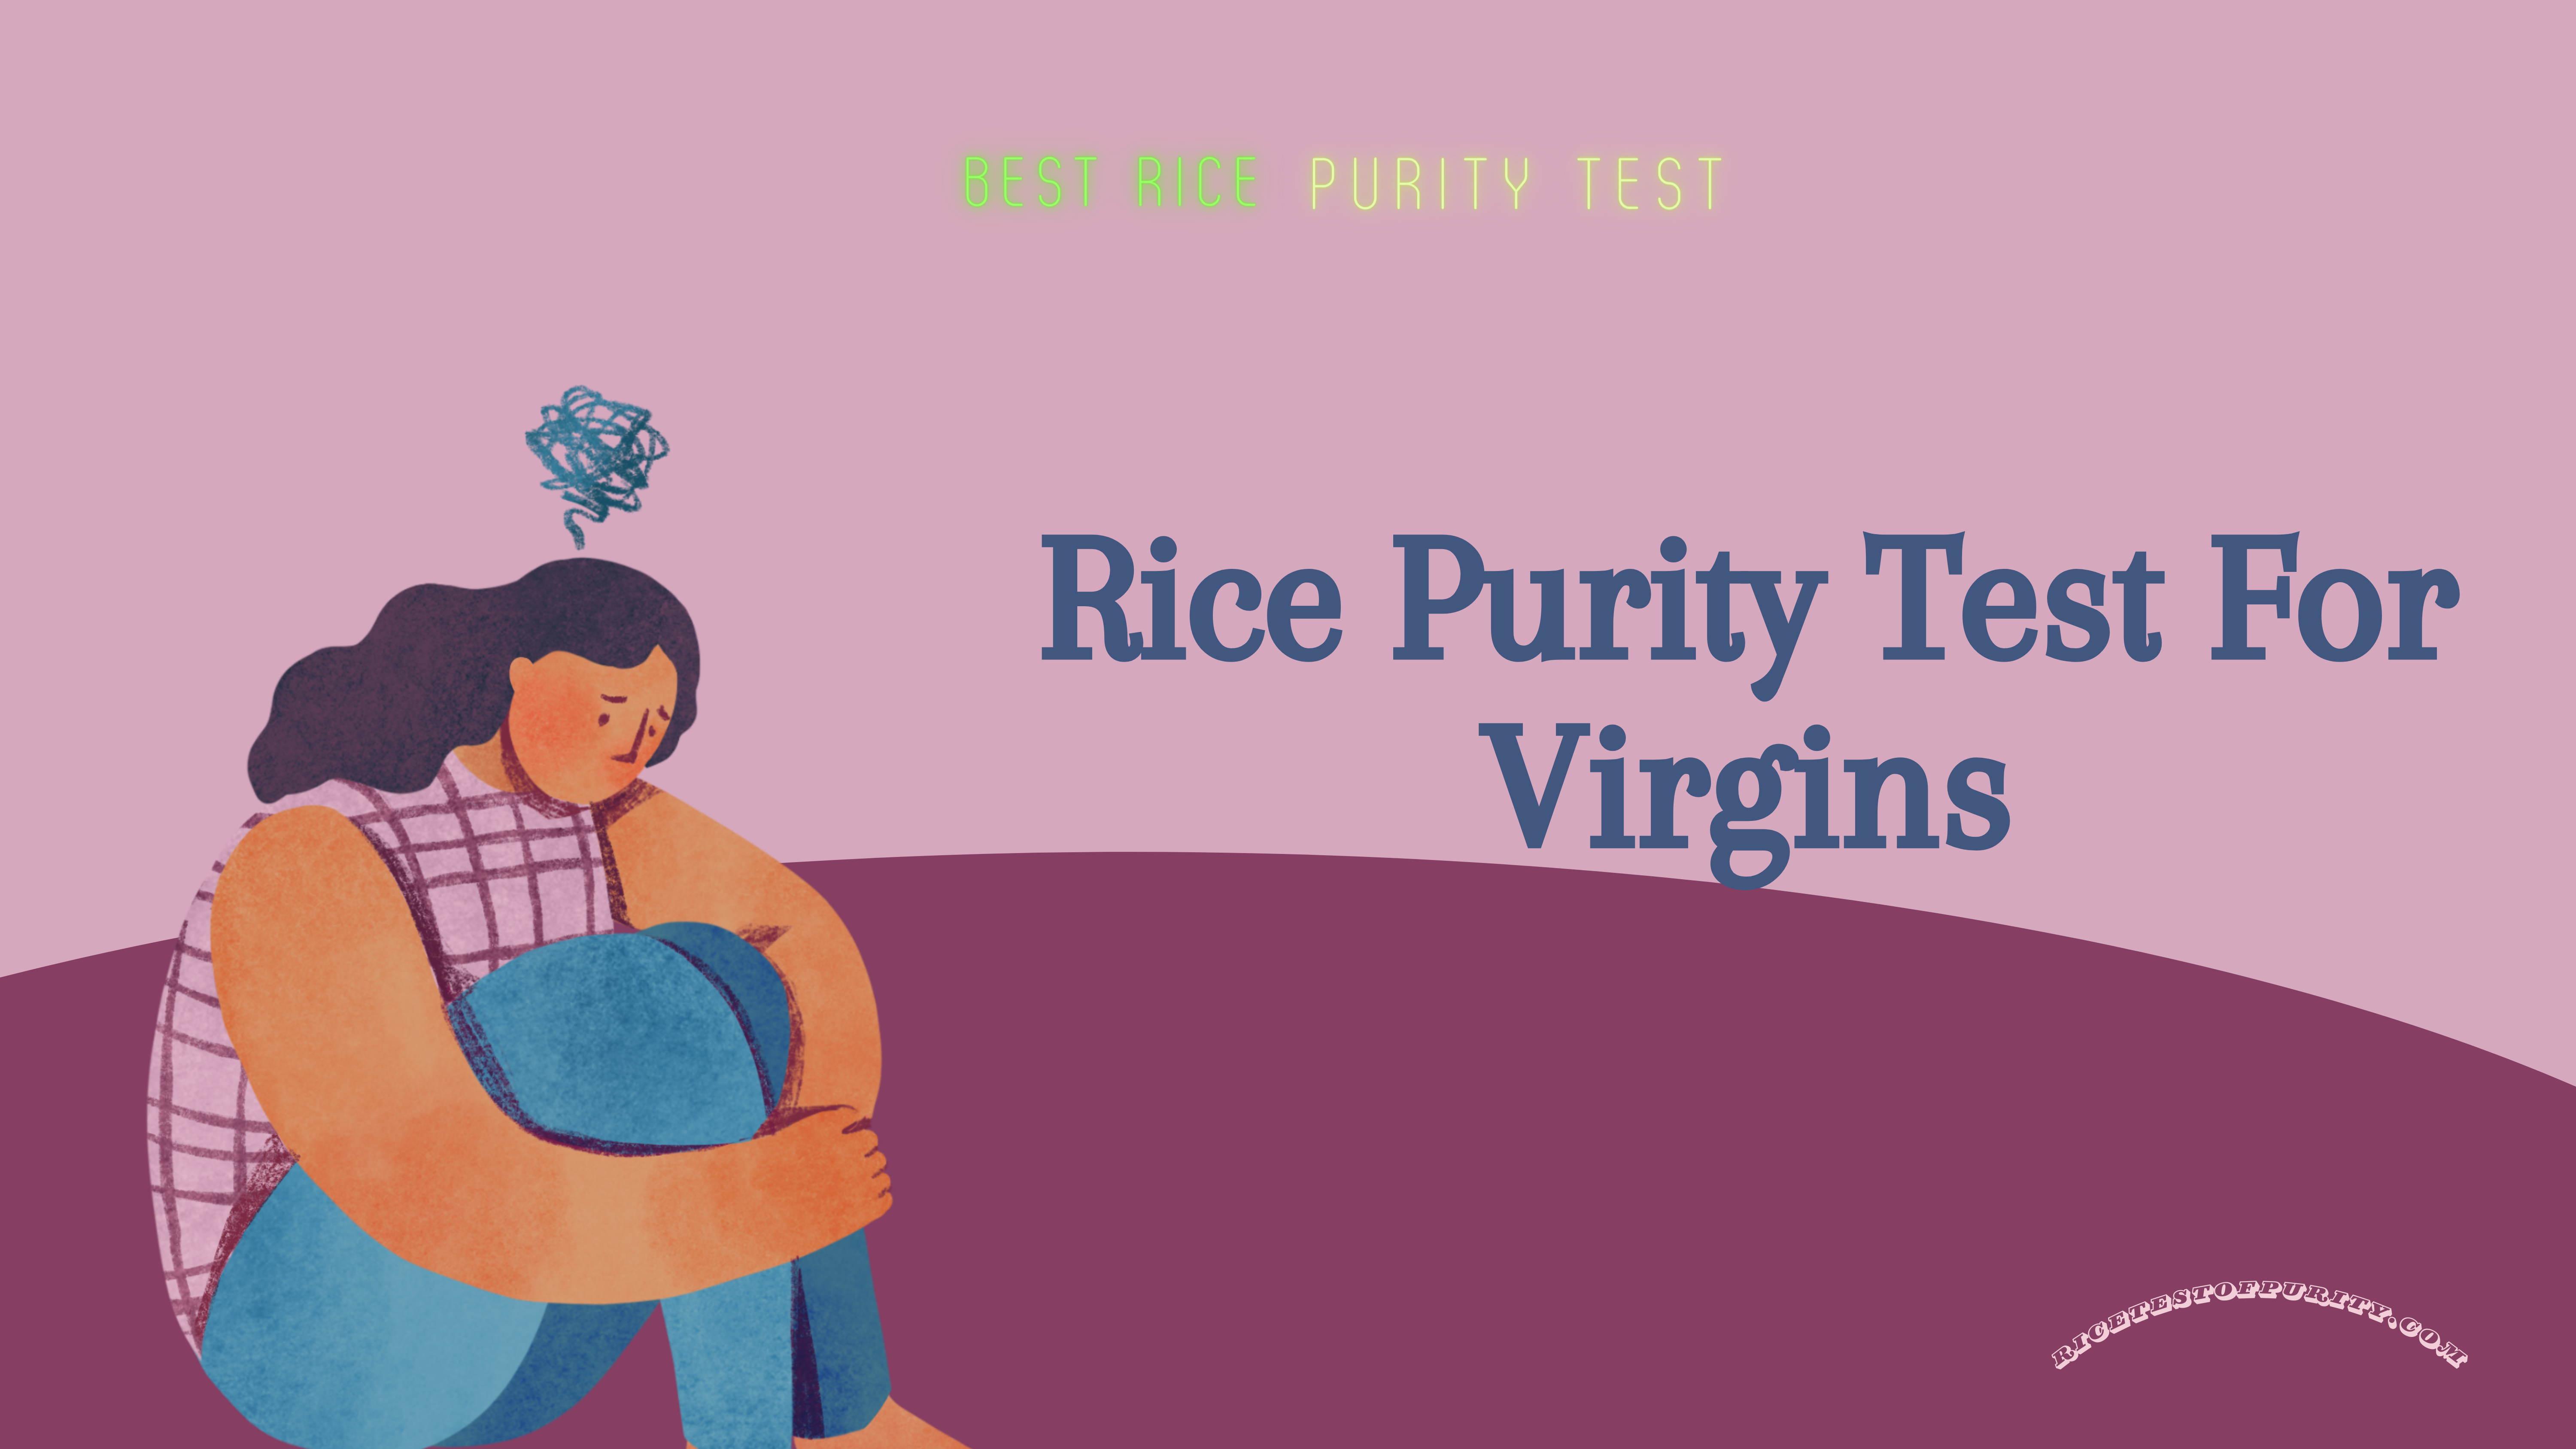 Rice Purity Test for Virgins